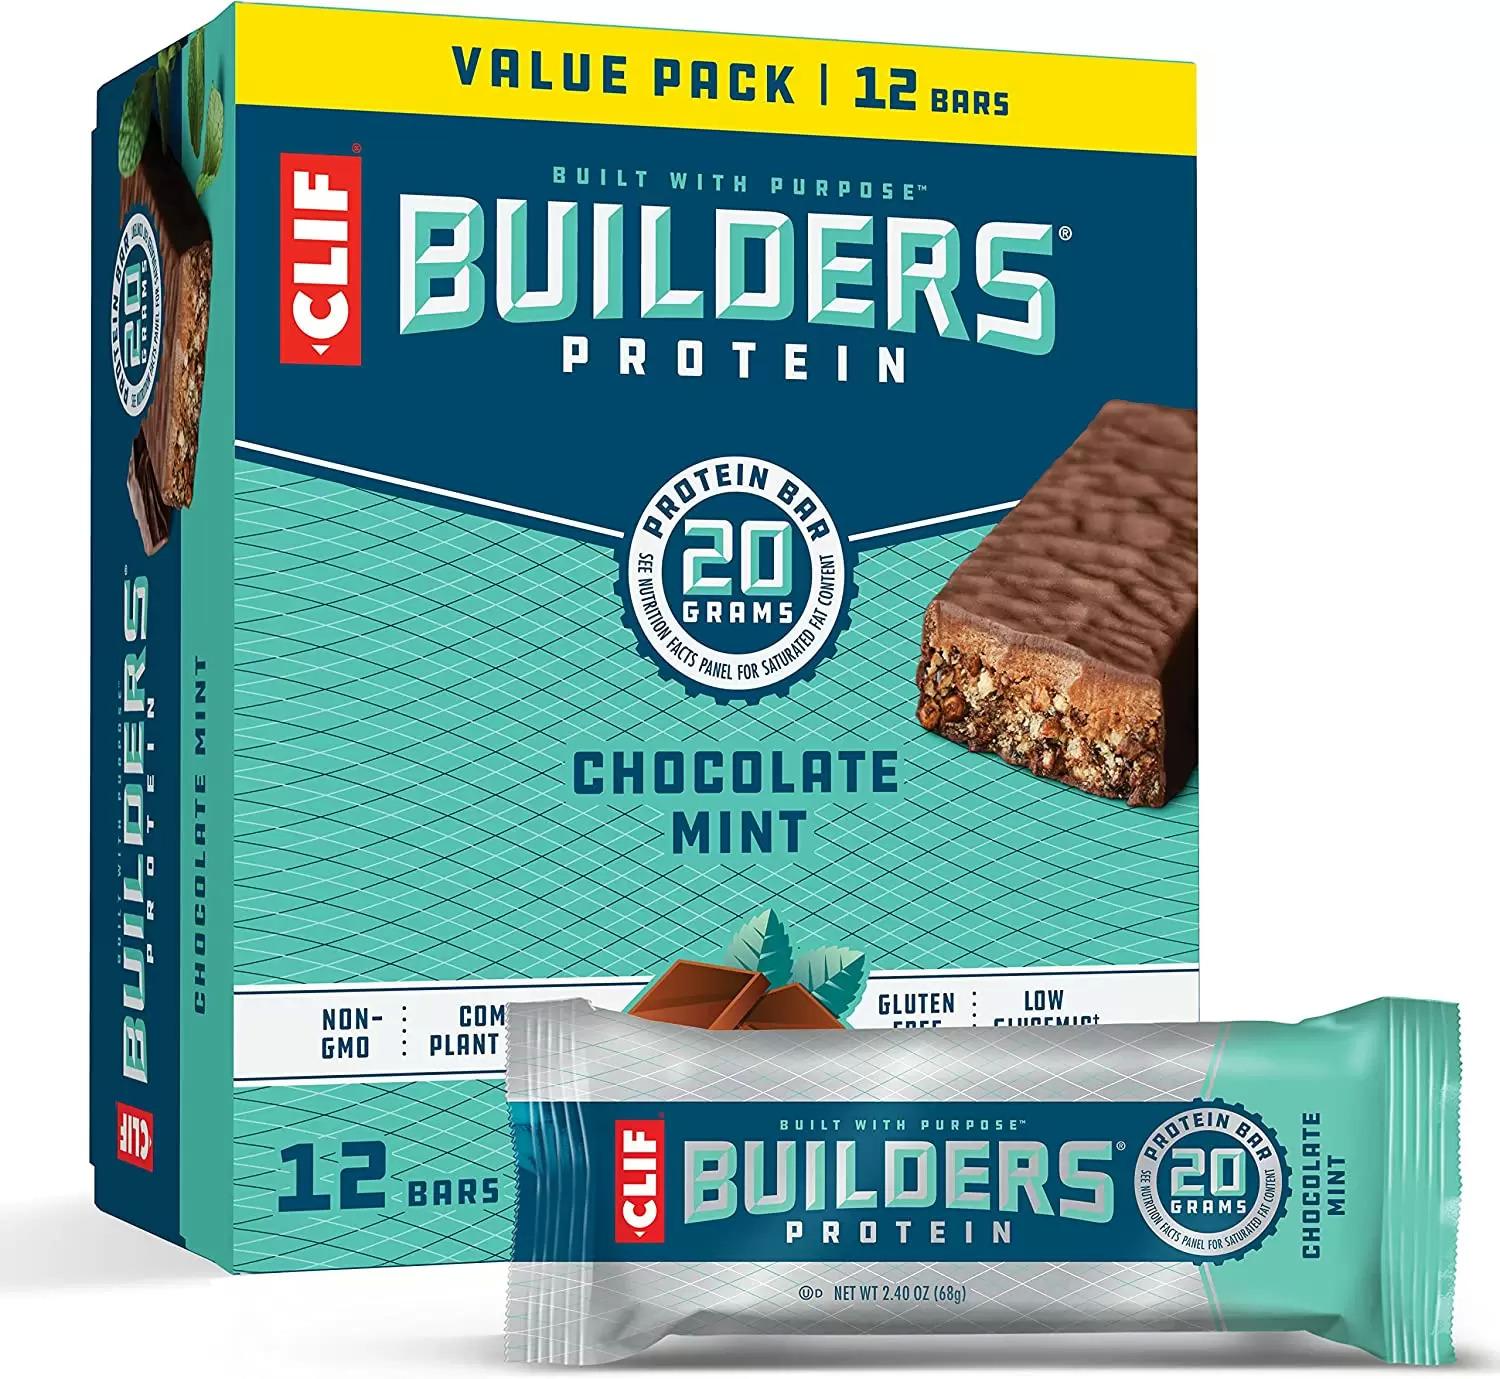 Clif Builders Protein Bars Chocolate Mint 12 Pack for $9.81 Shipped